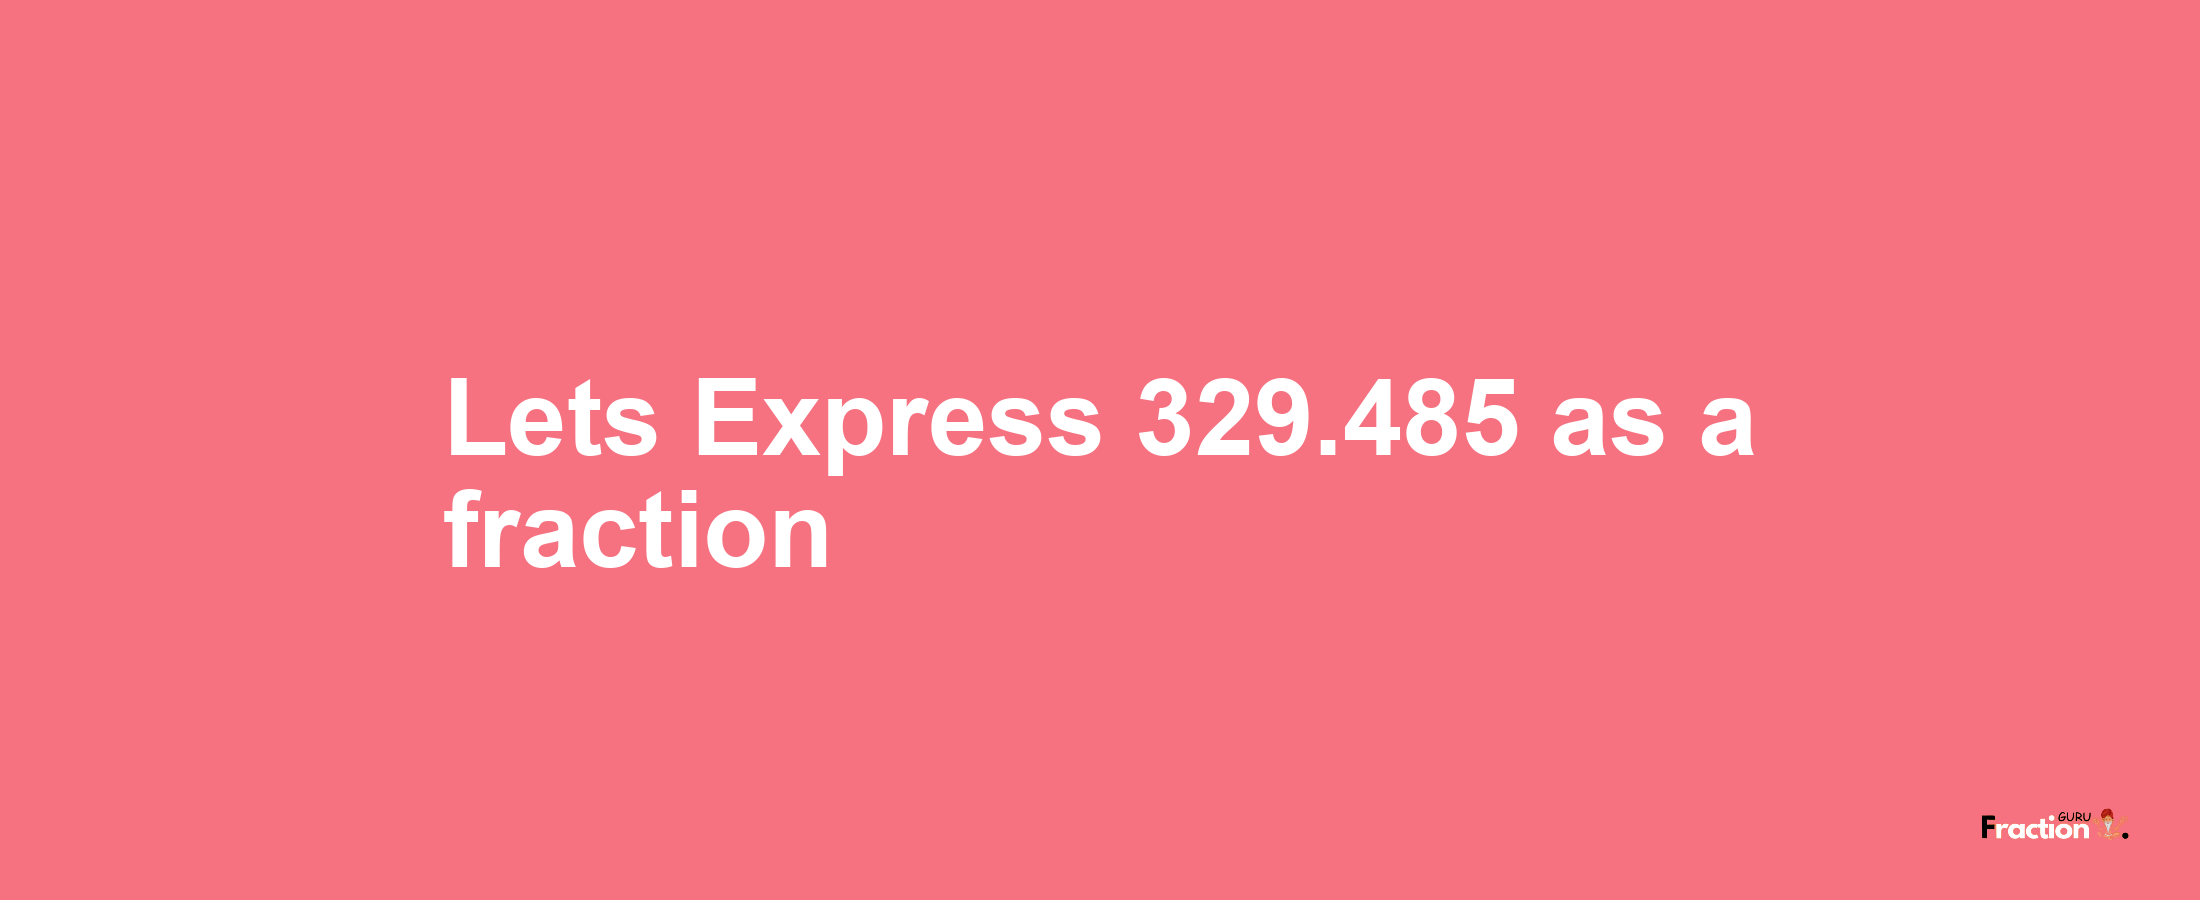 Lets Express 329.485 as afraction